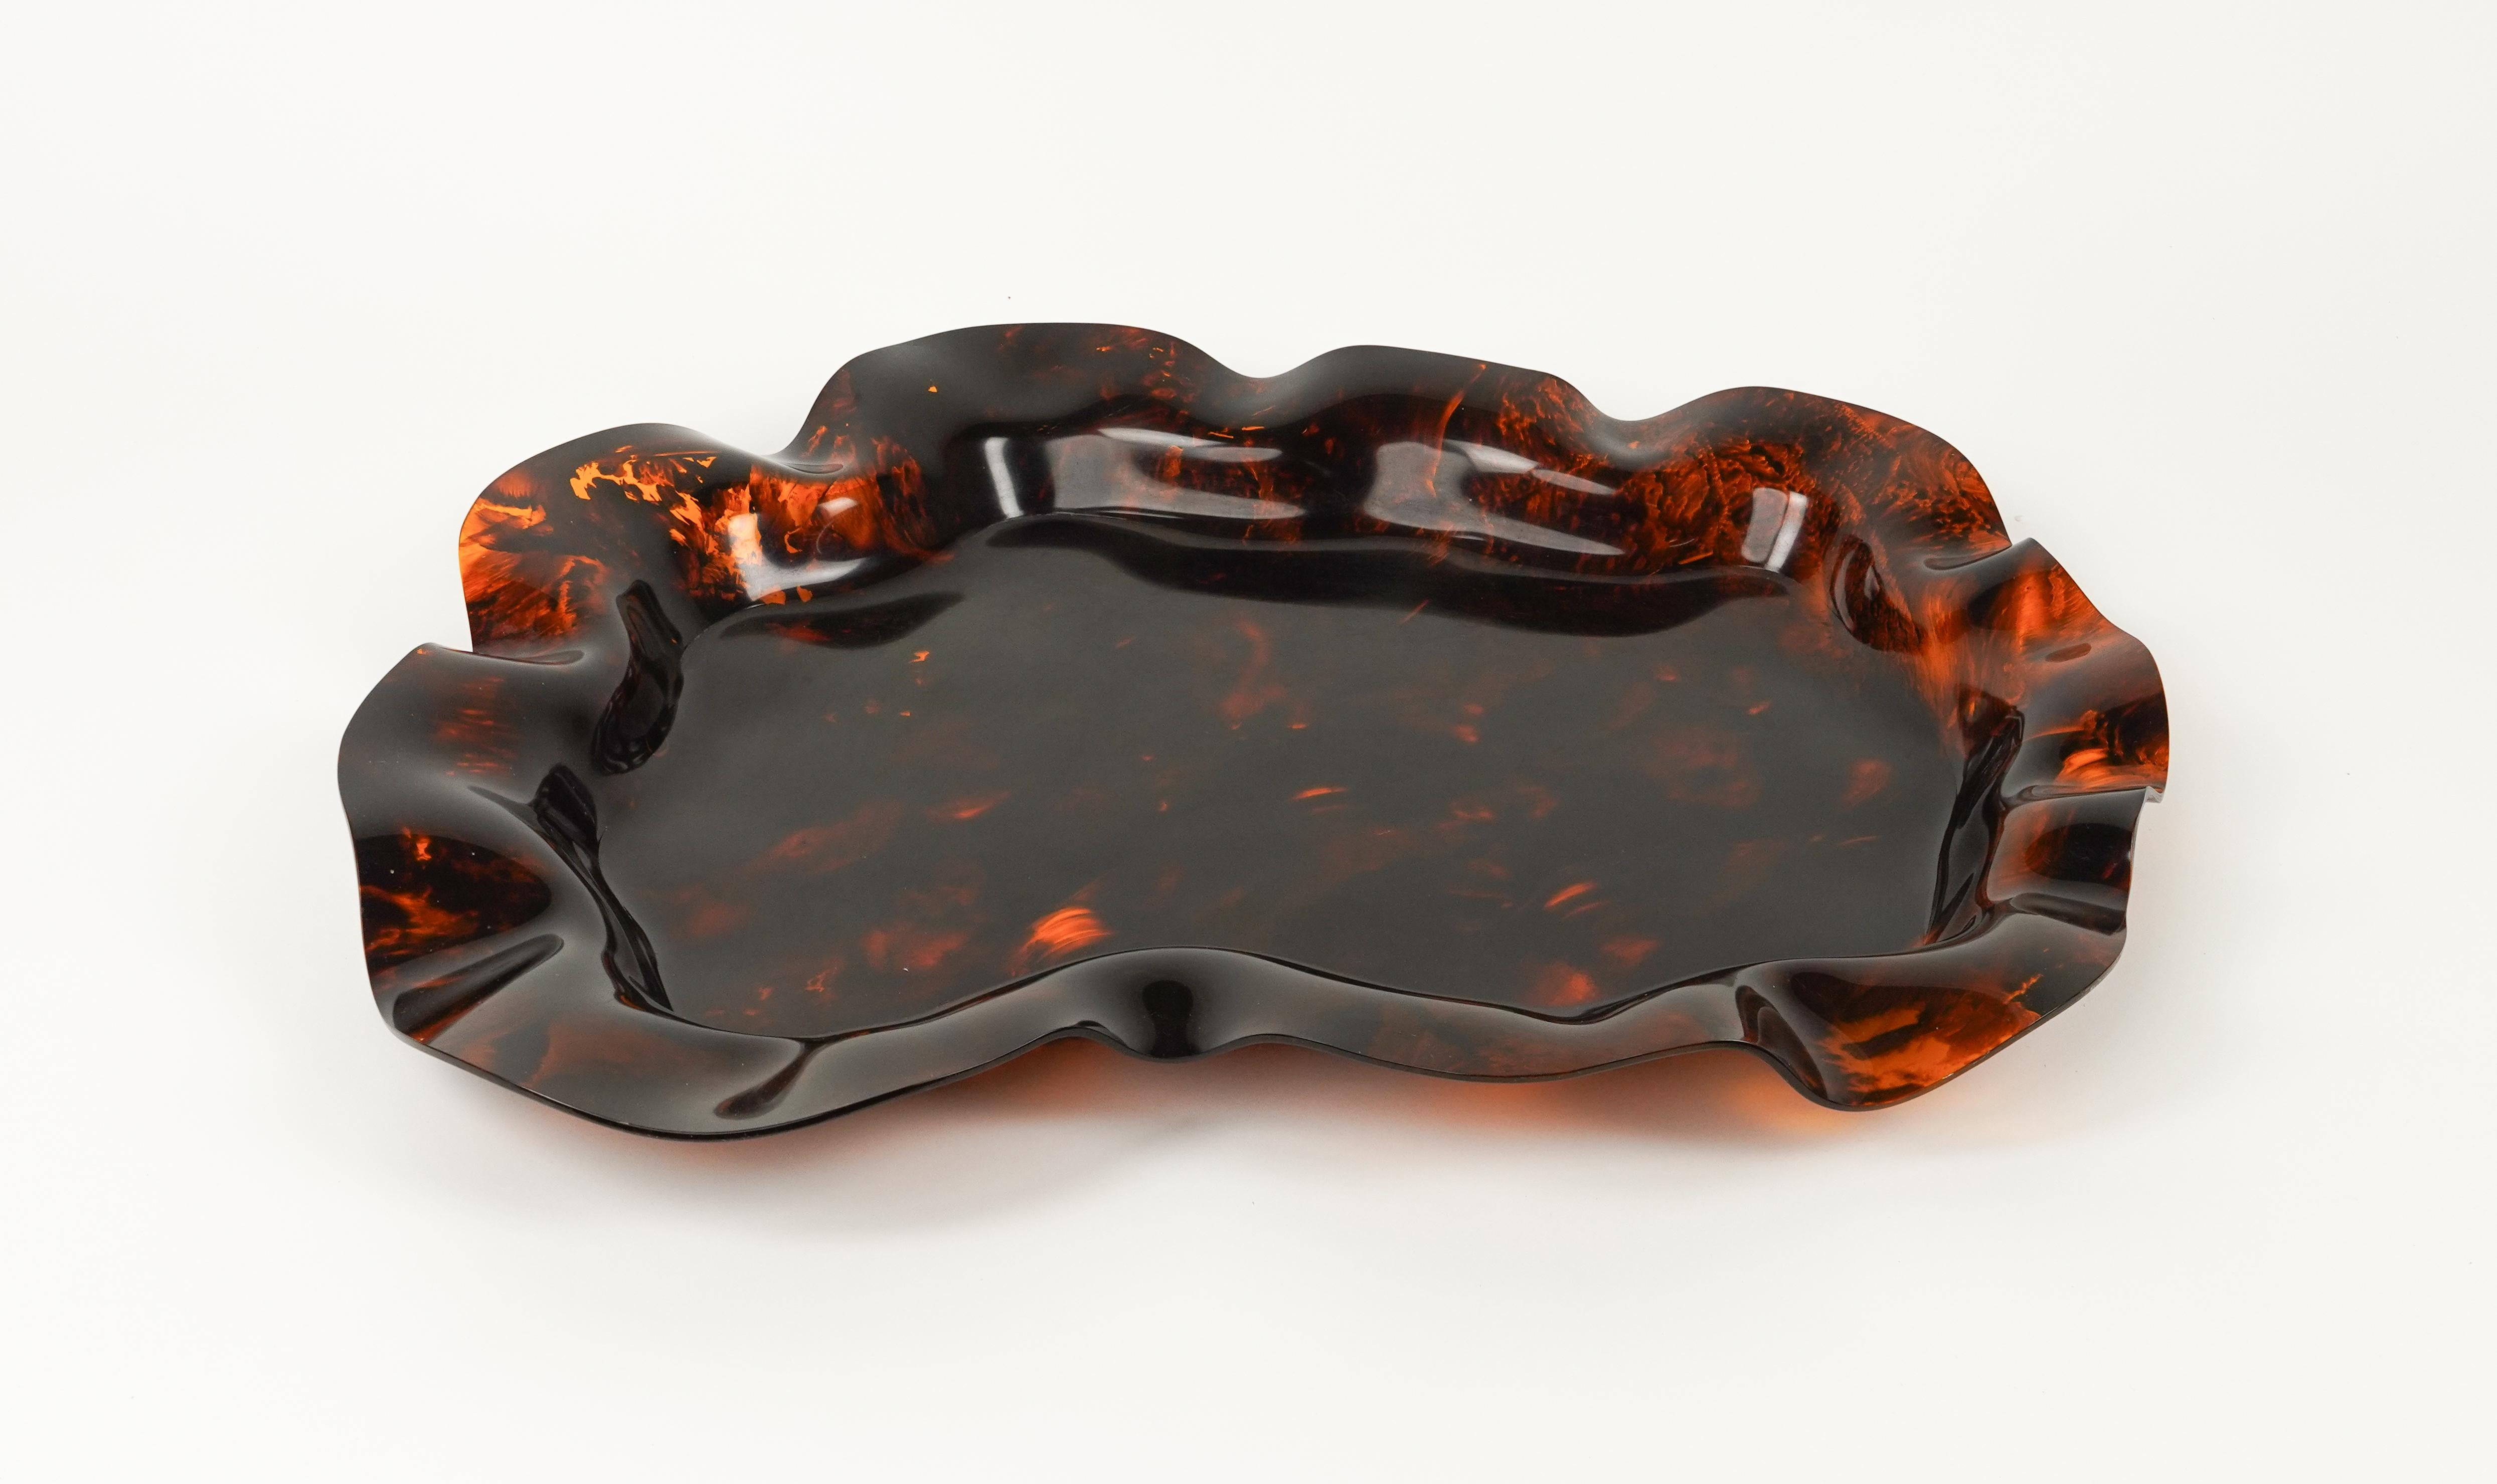 Large Serving Tray or Centerpiece Lucite Faux Tortoiseshell, Italy 1970s In Good Condition For Sale In Rome, IT